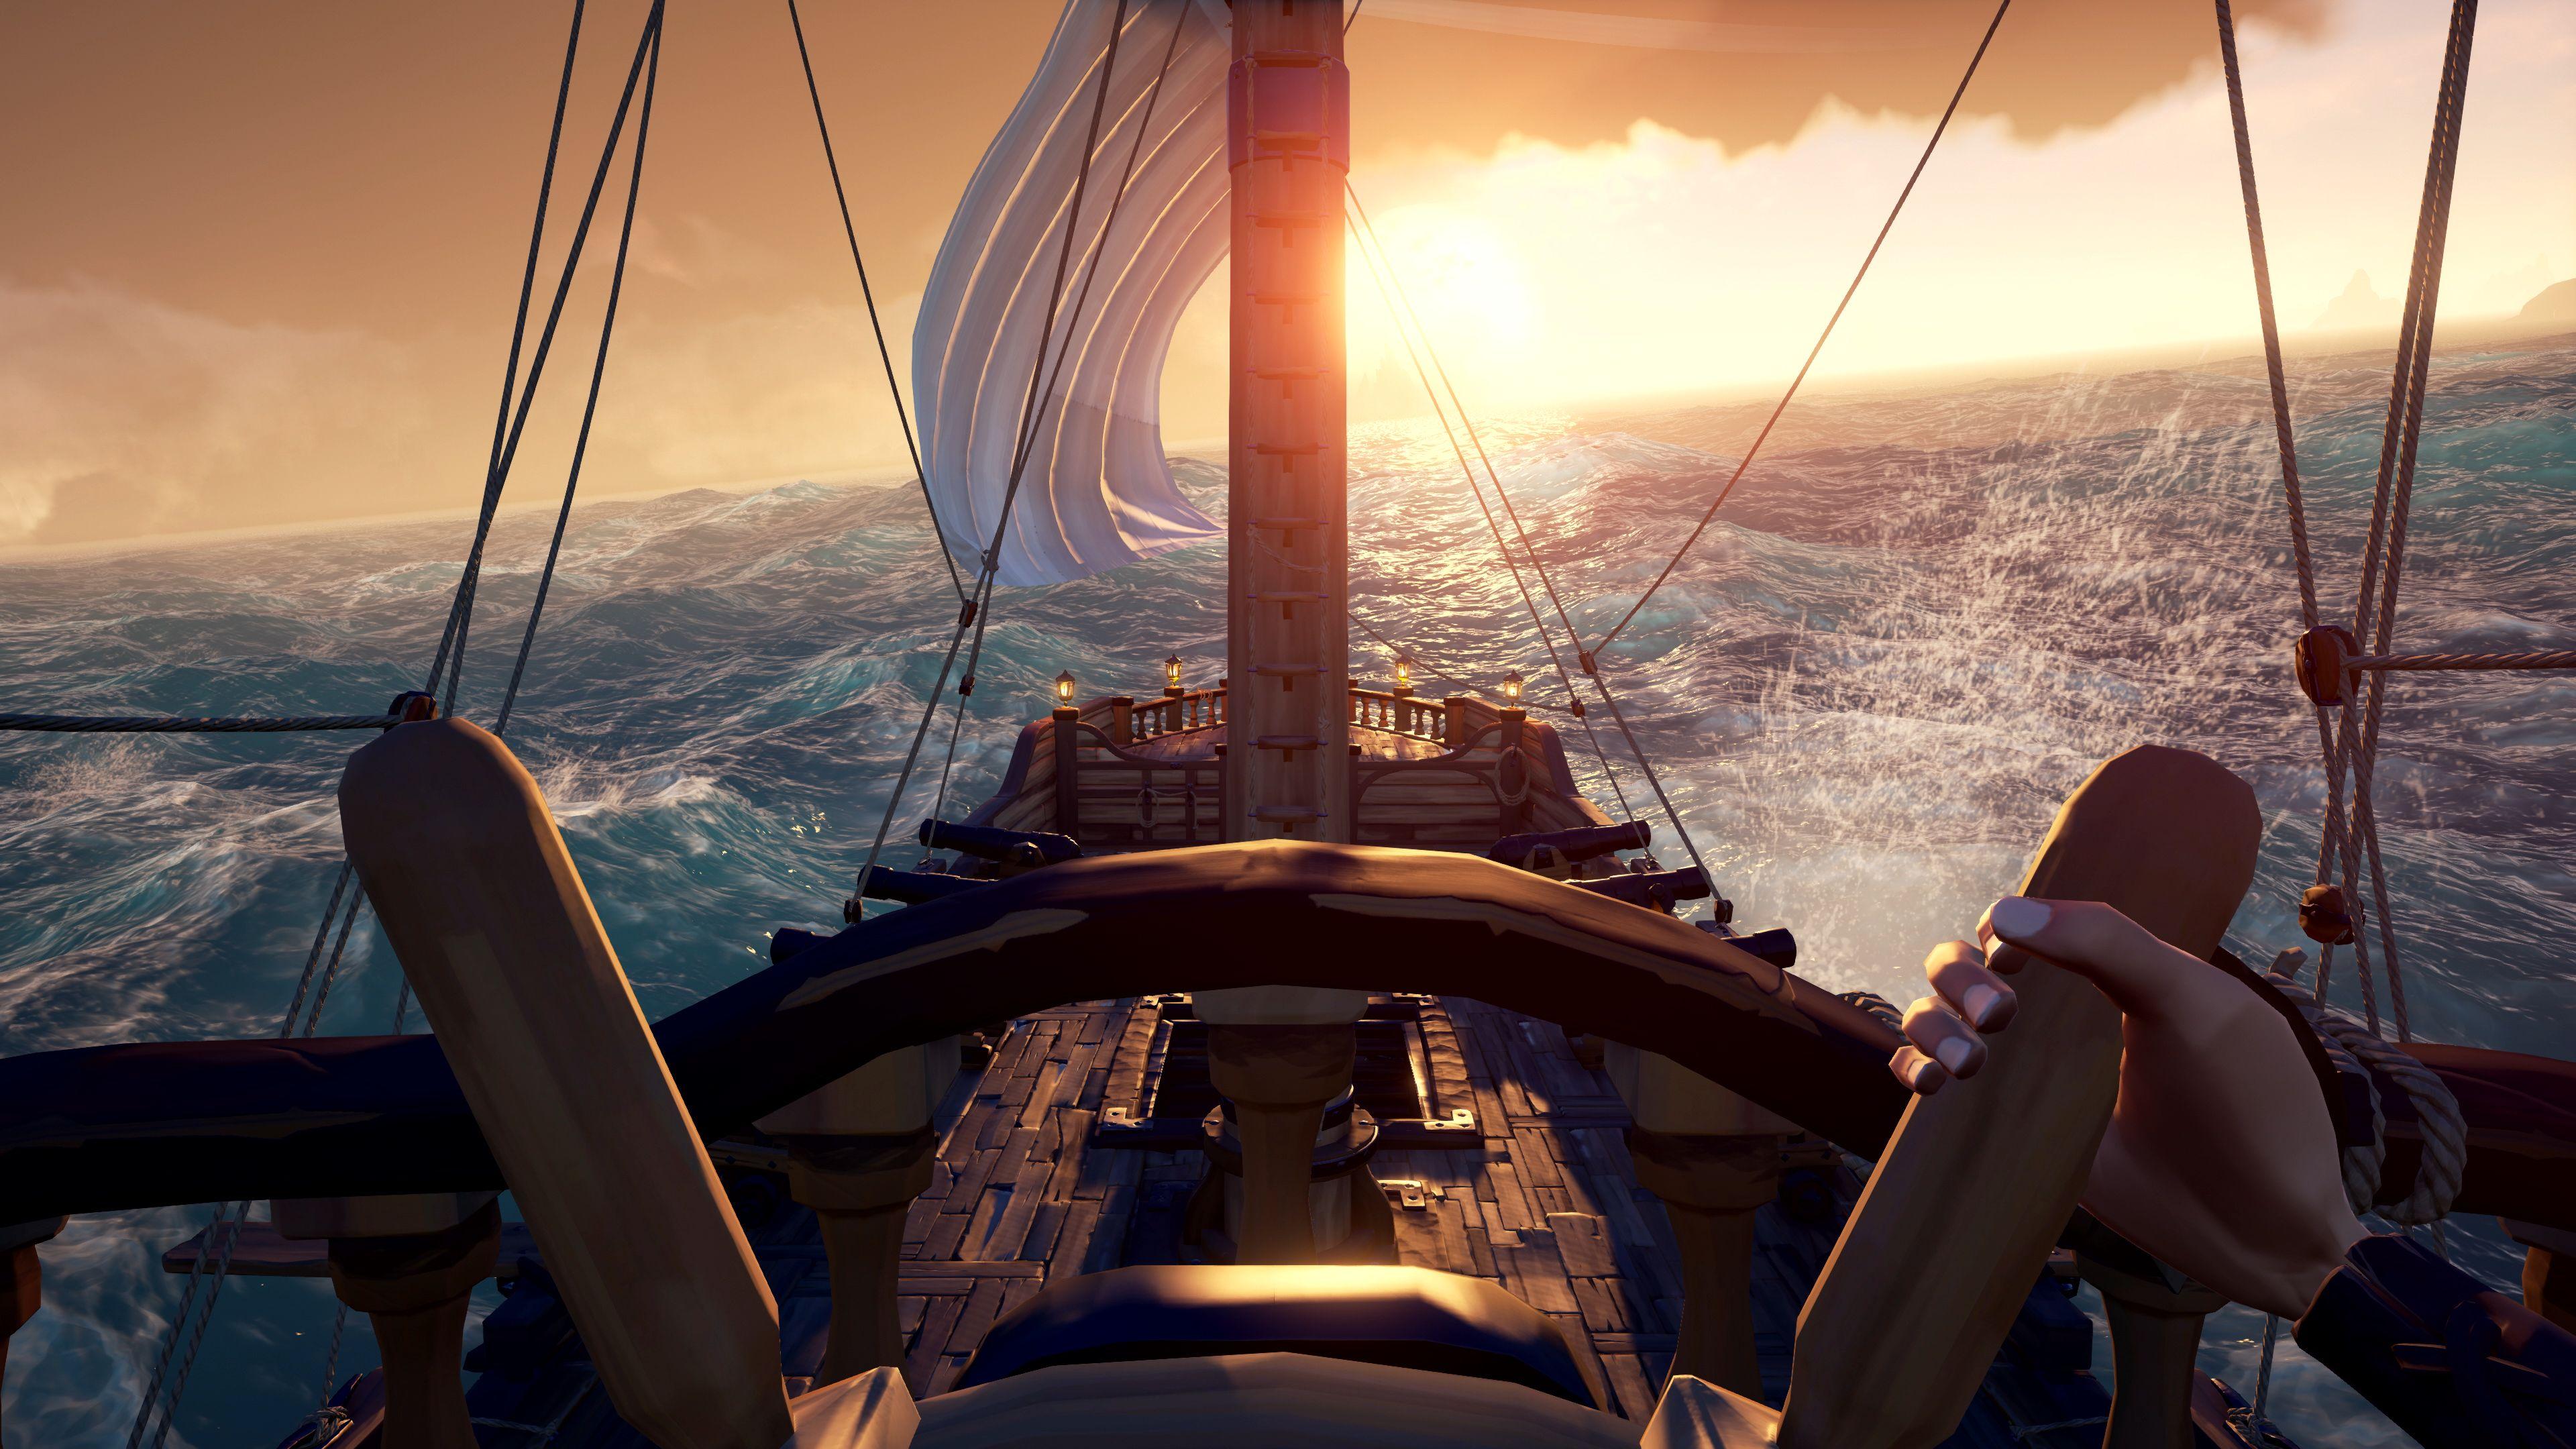 sea of thieves, video game